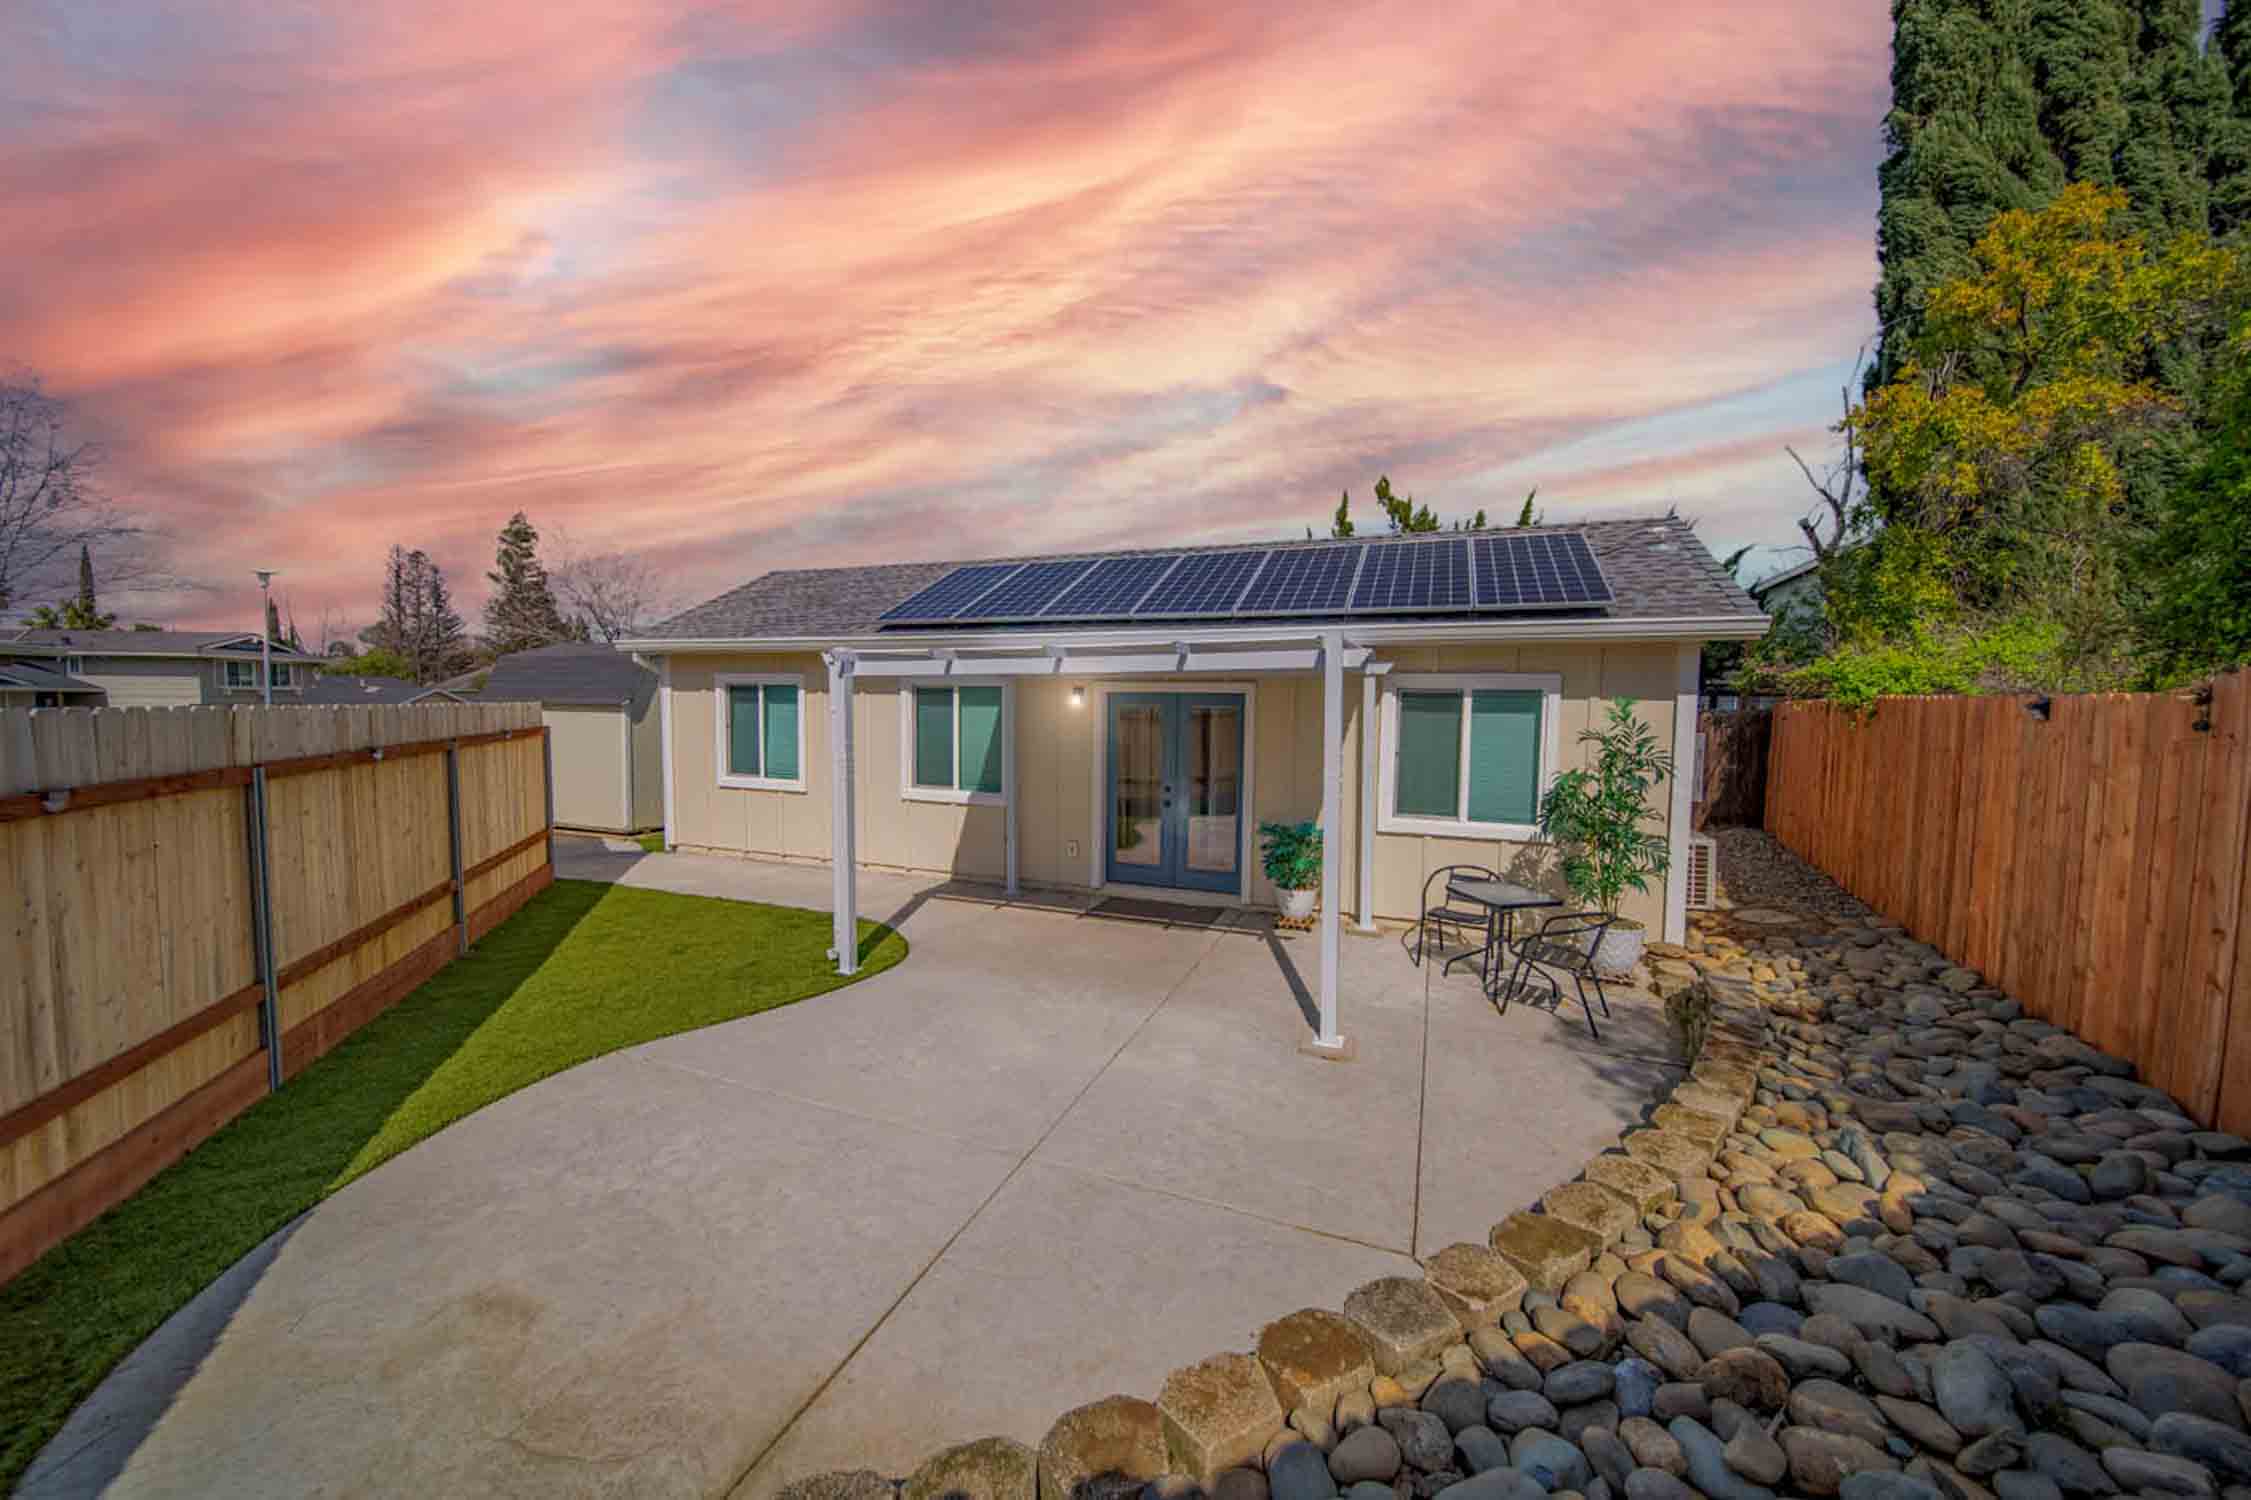 An ADU home with solar panels on the roof provided by top our top ADU builder in Sacramento.